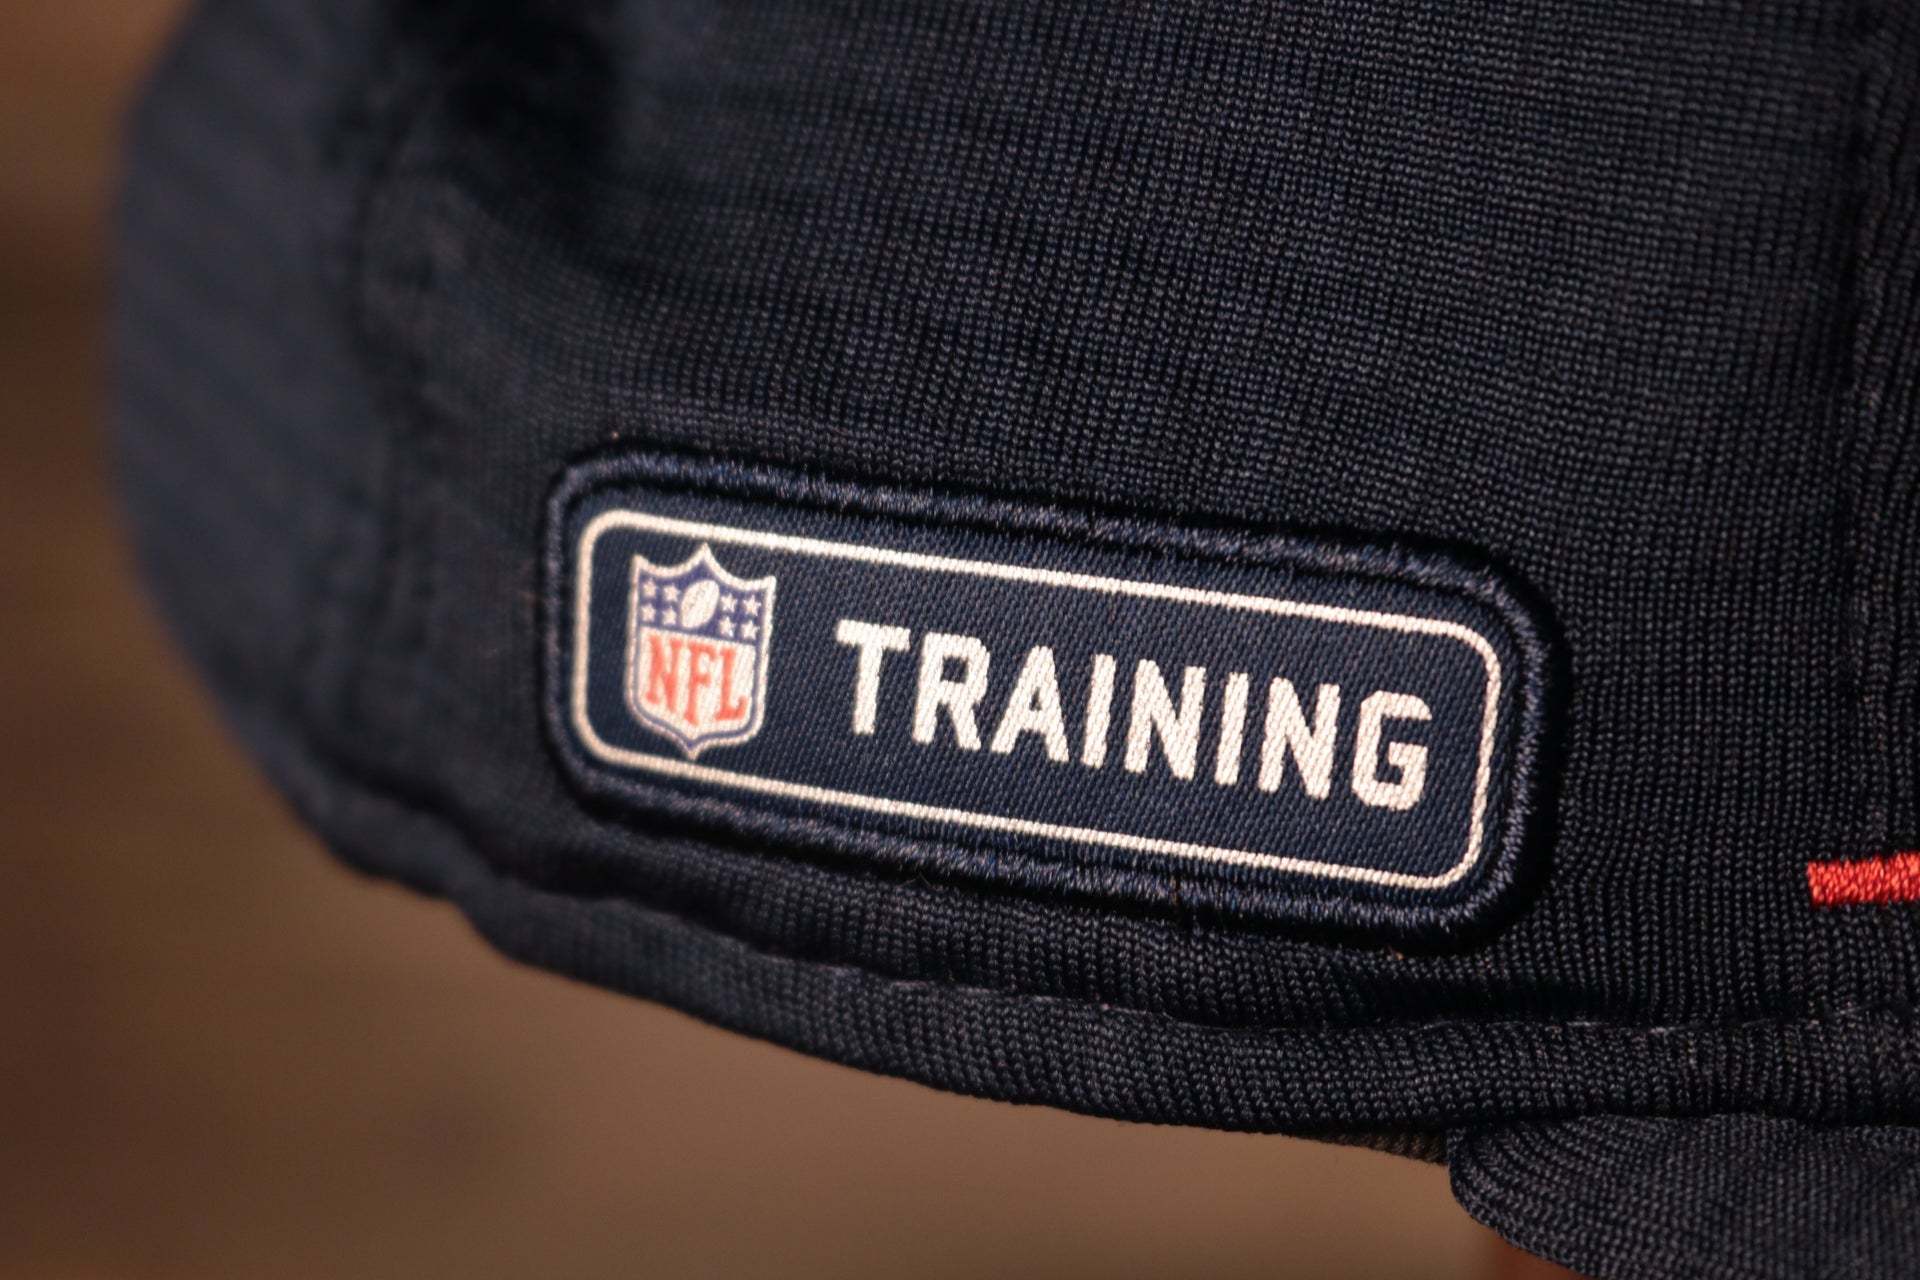 Patriots 2020 Training Camp Snapback Hat | New England Patriots 2020 On-Field Navy Training Camp Snap Cap the training logo is on the side